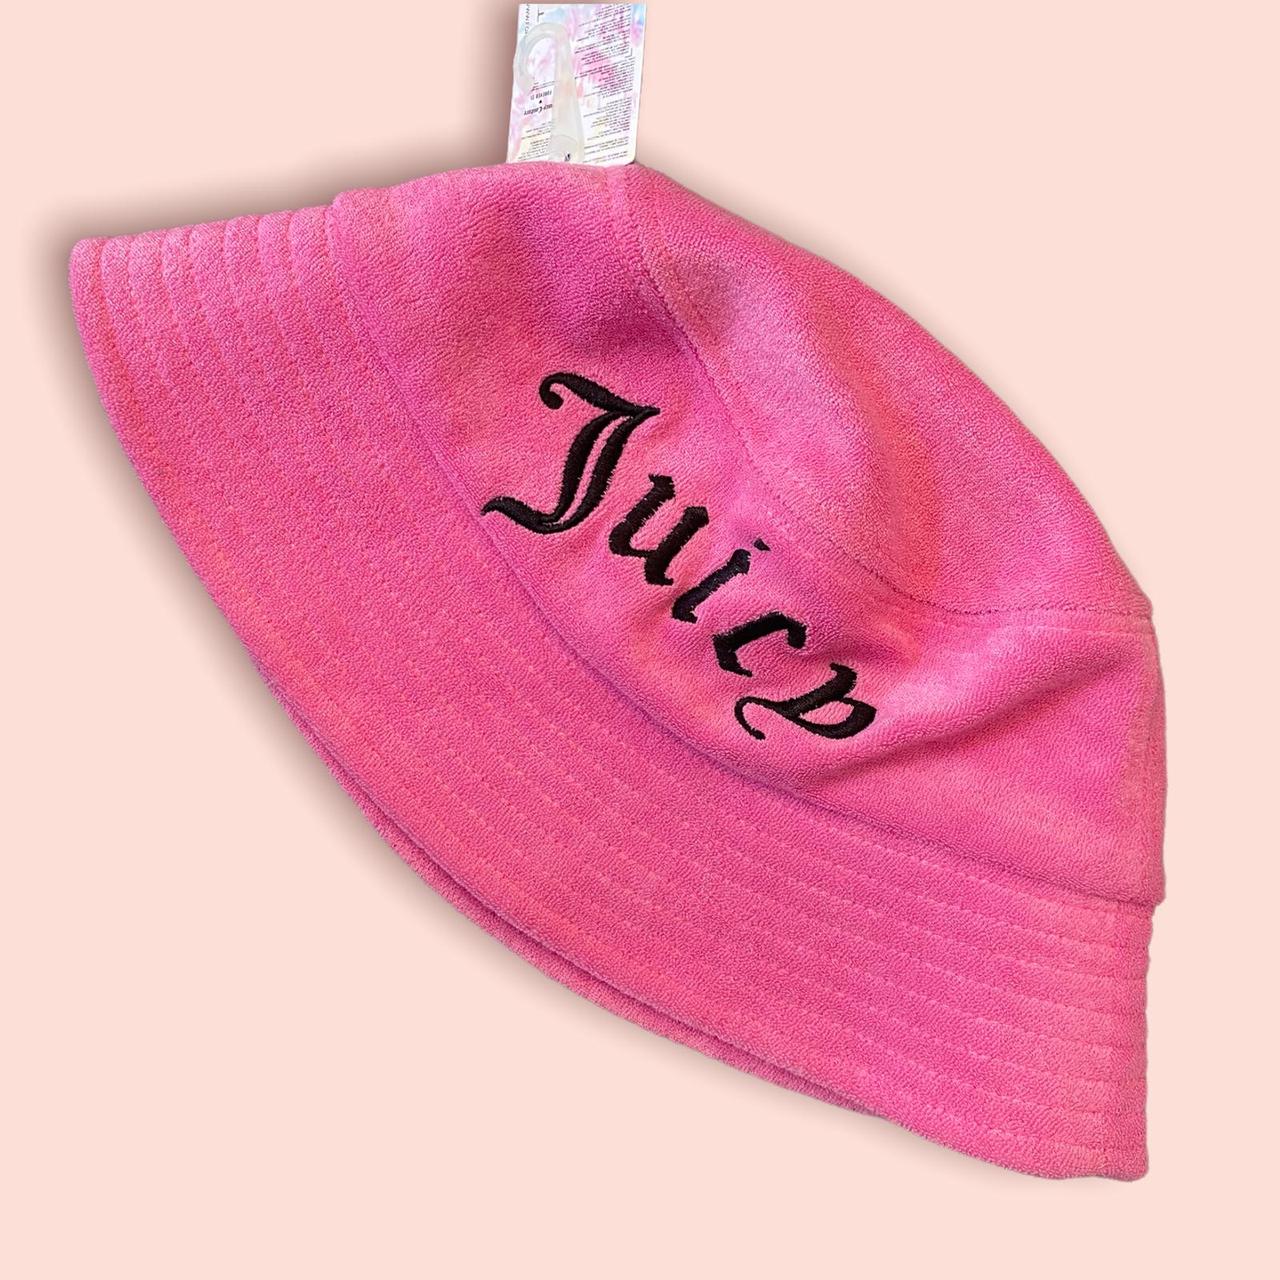 Juicy Couture Pink and Black Terry Cloth Bucket Hat